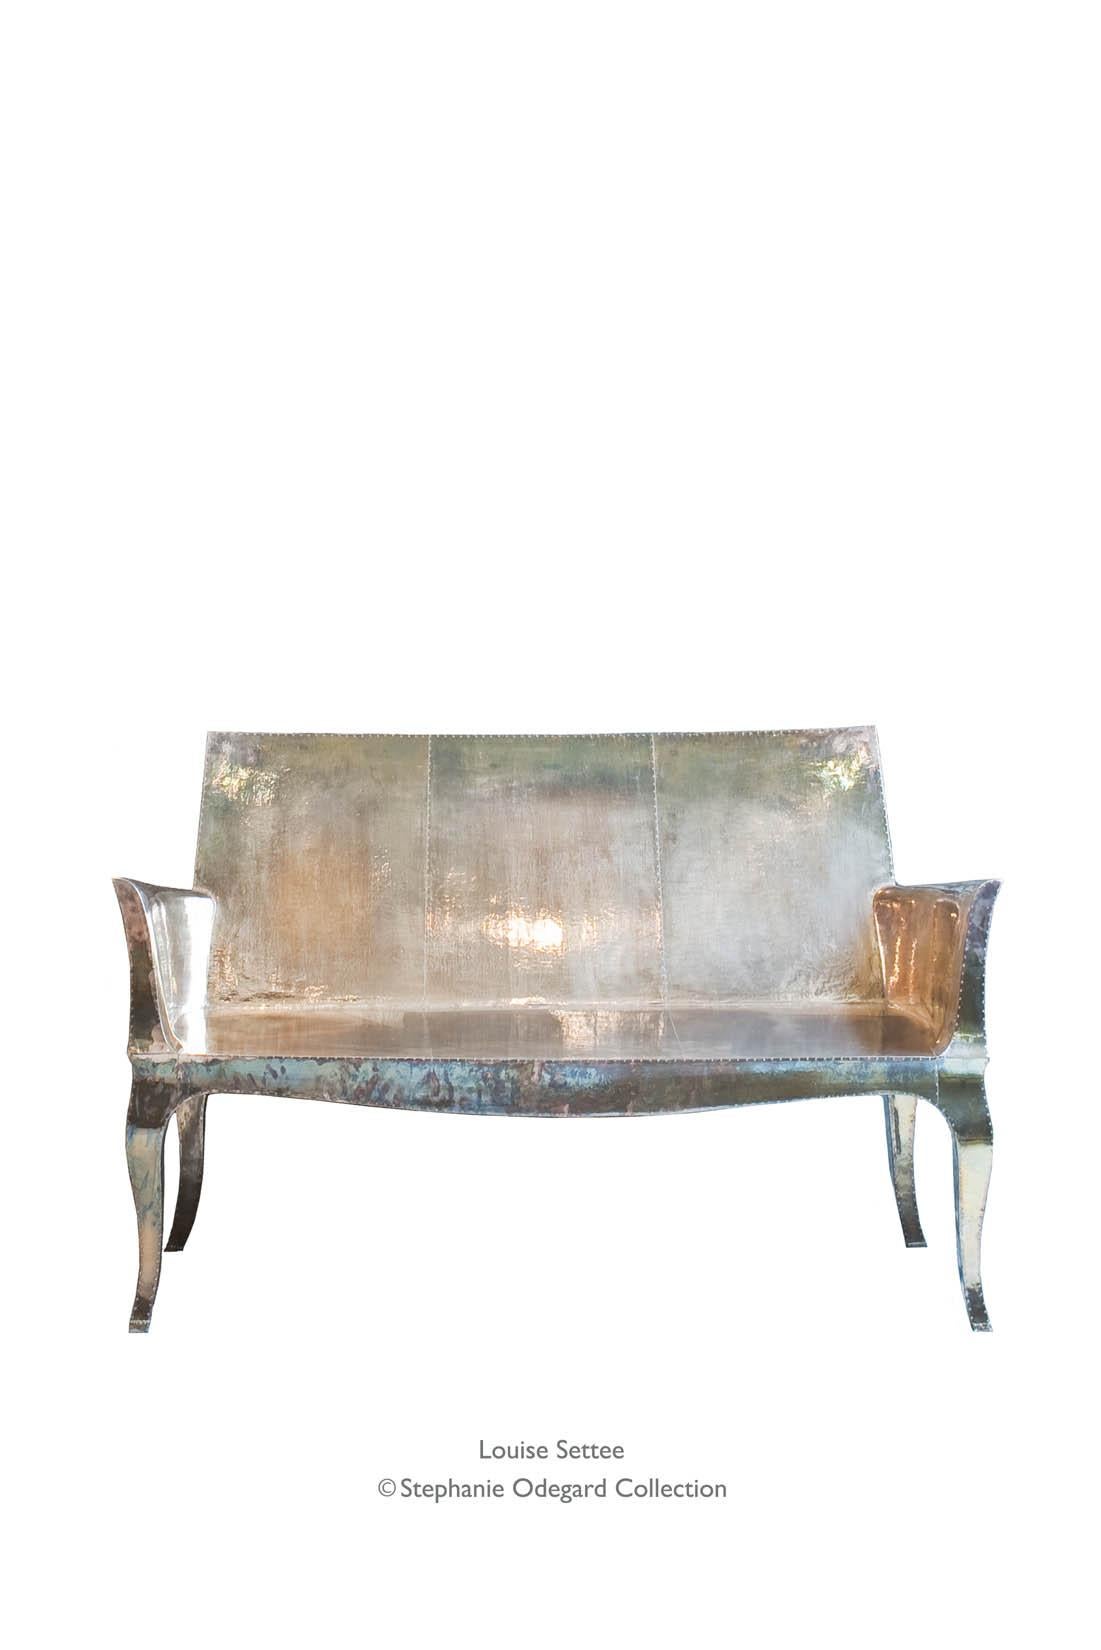 Louise Settee Art Deco Lounge Chairs in Mid. Hammered Copper by Paul Mathieu For Sale 6